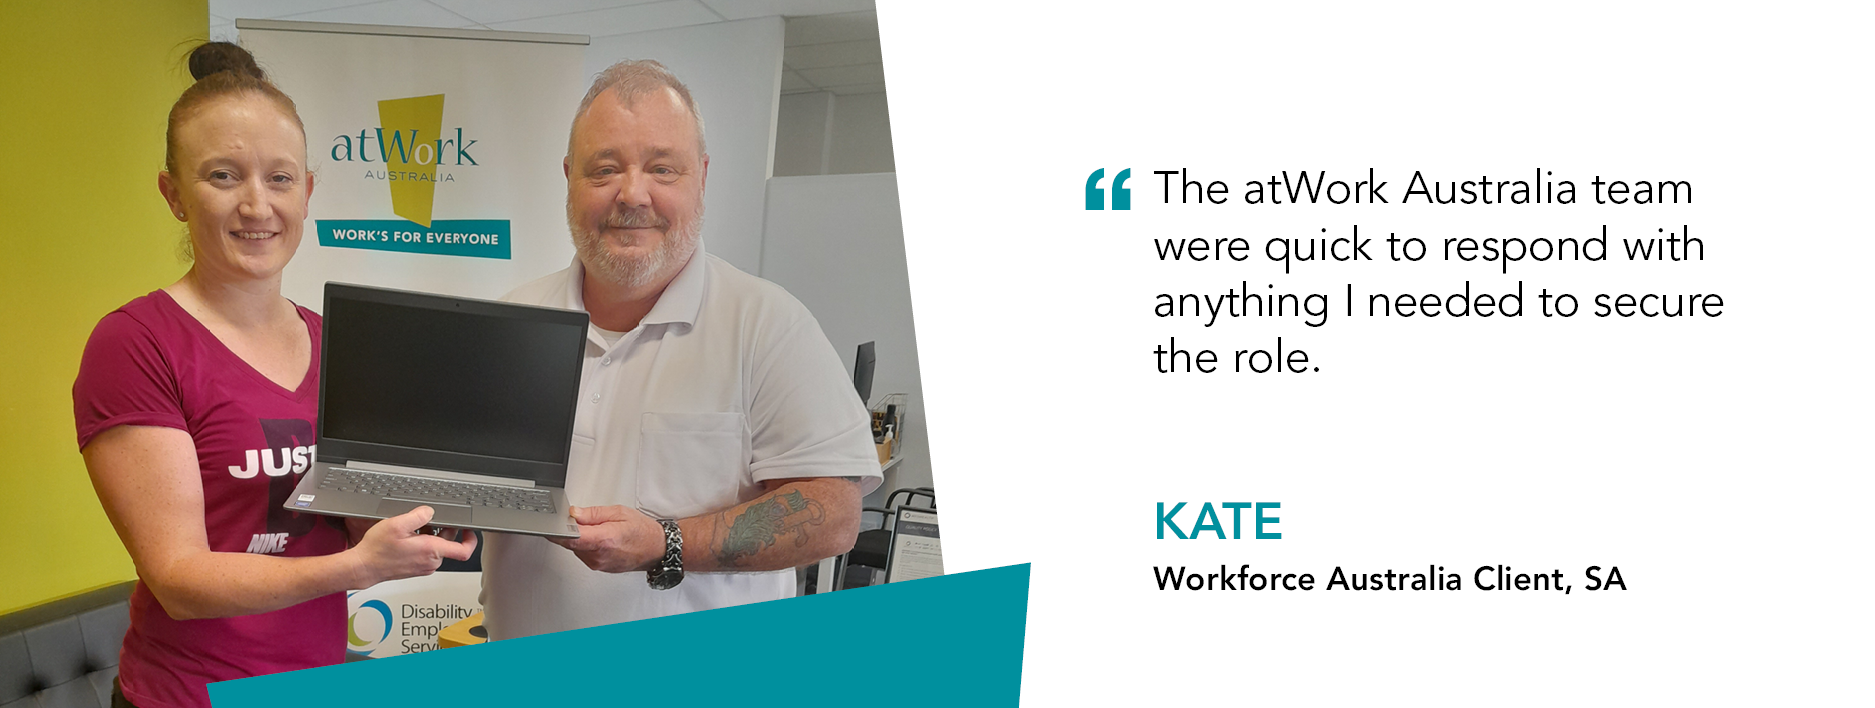 Quote reads: “The atWork Australia team where quick to respond with anything I needed to secure the role,” said Kate, Workforce Australia Client, SA 